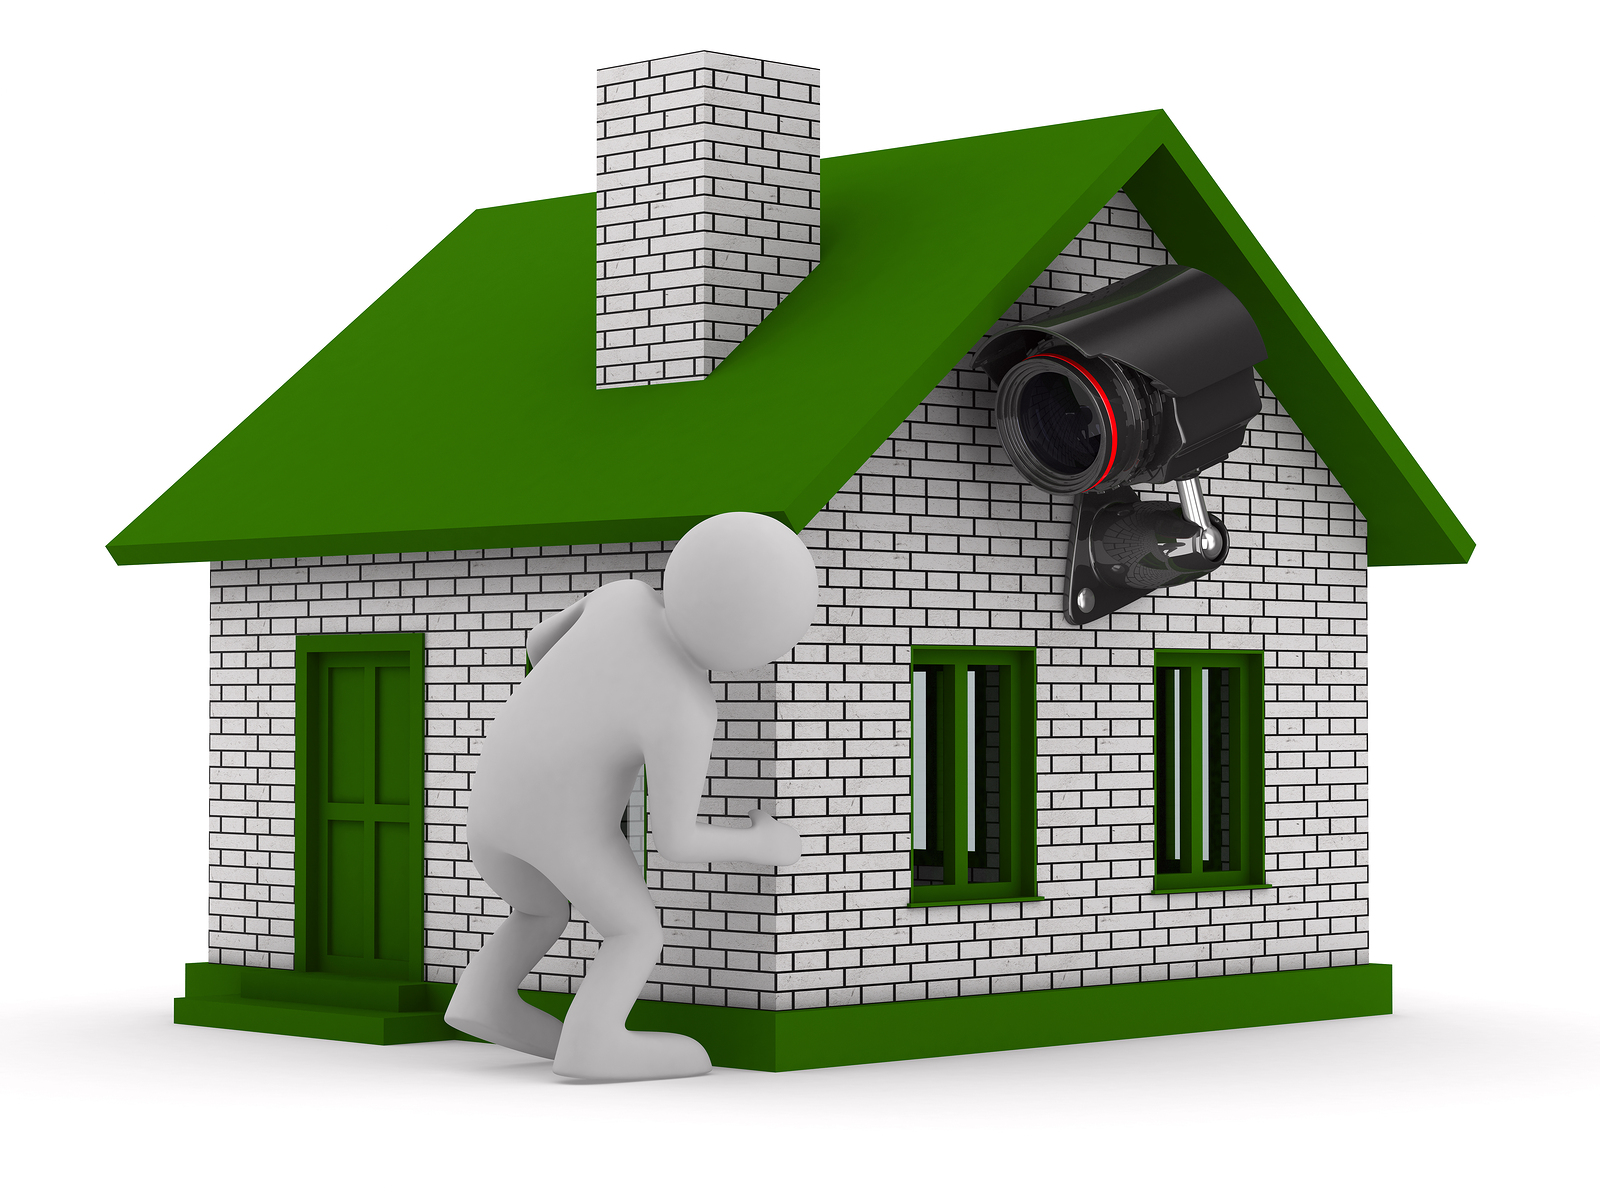 How Strong Security System Helps You to Combat Crime?